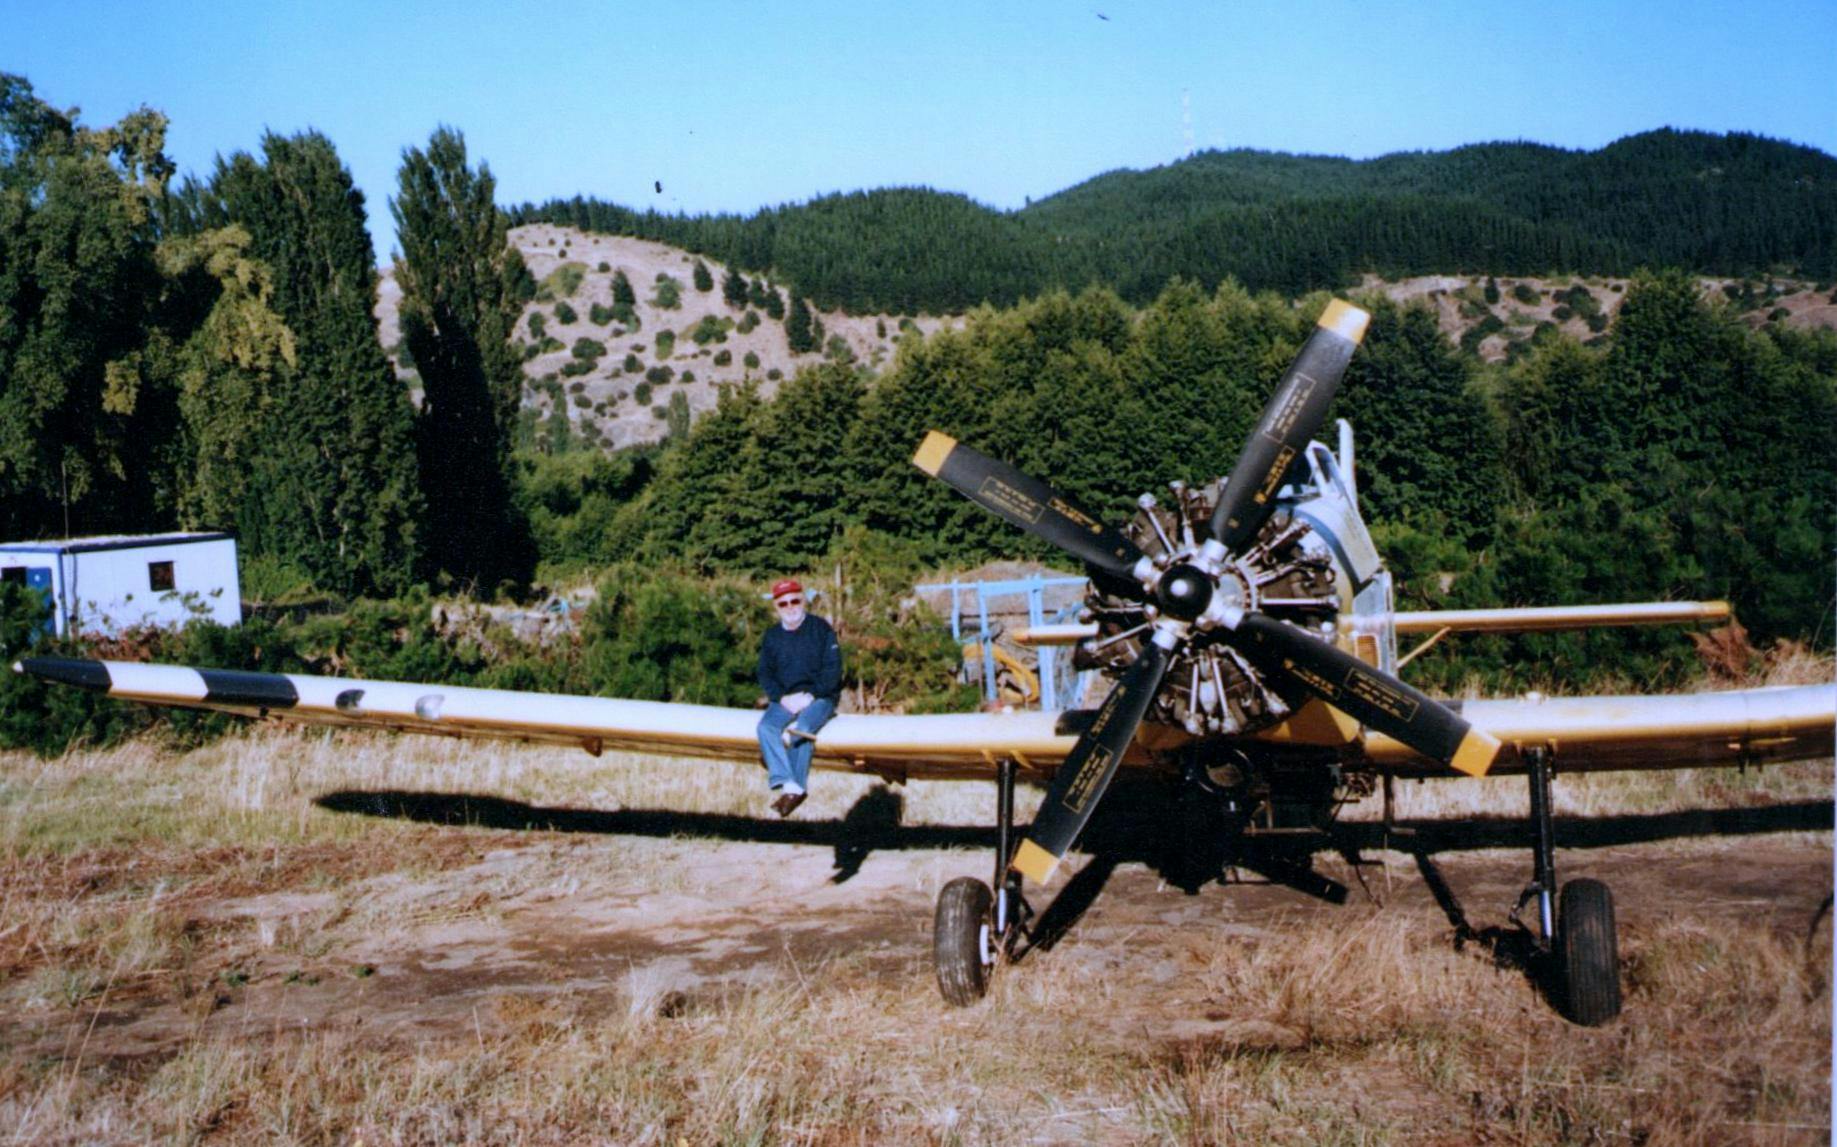 Chile, Lacha Airport, early 21st century. Zbigniew Kowalski sits on the wing of a PZL M18 Dromader plane.